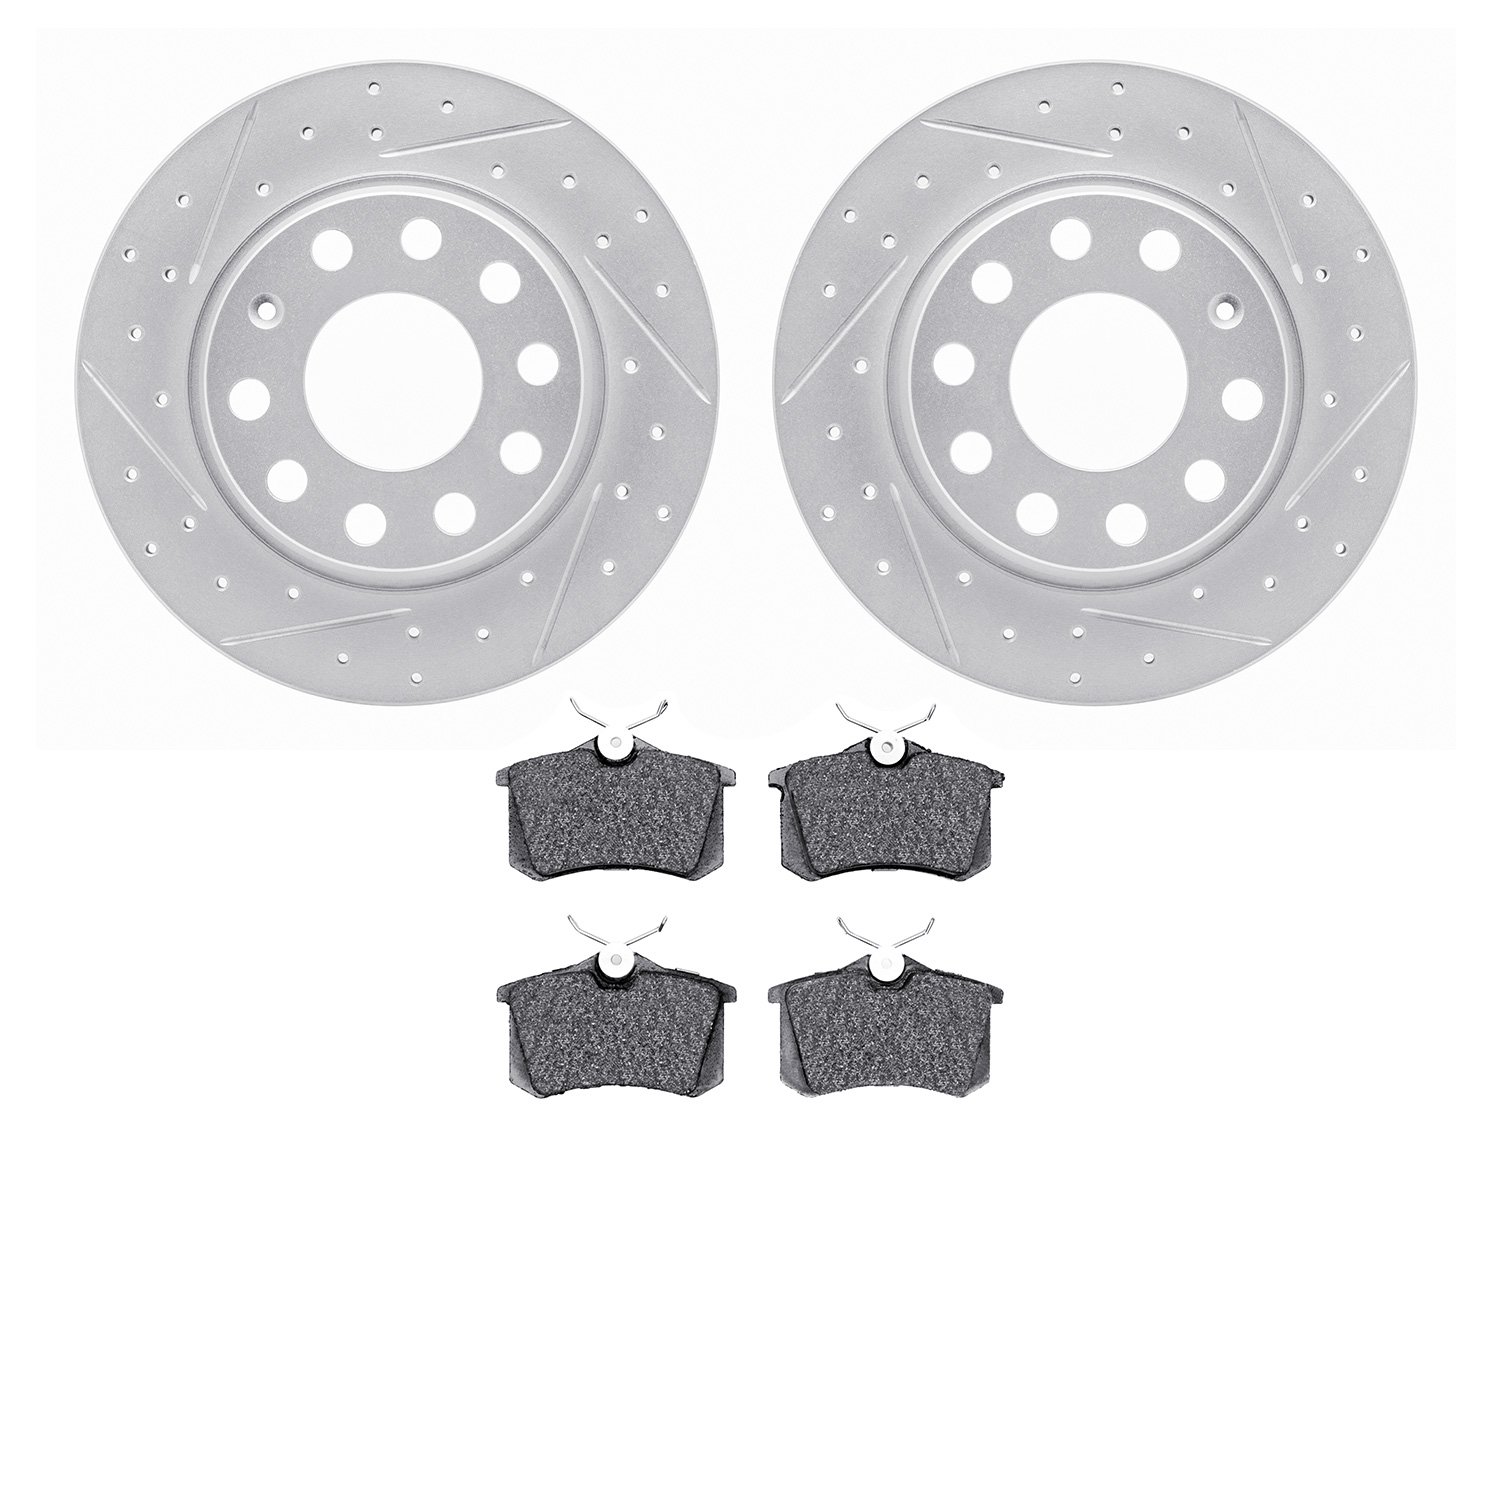 2502-73043 Geoperformance Drilled/Slotted Rotors w/5000 Advanced Brake Pads Kit, 2000-2008 Audi/Volkswagen, Position: Rear